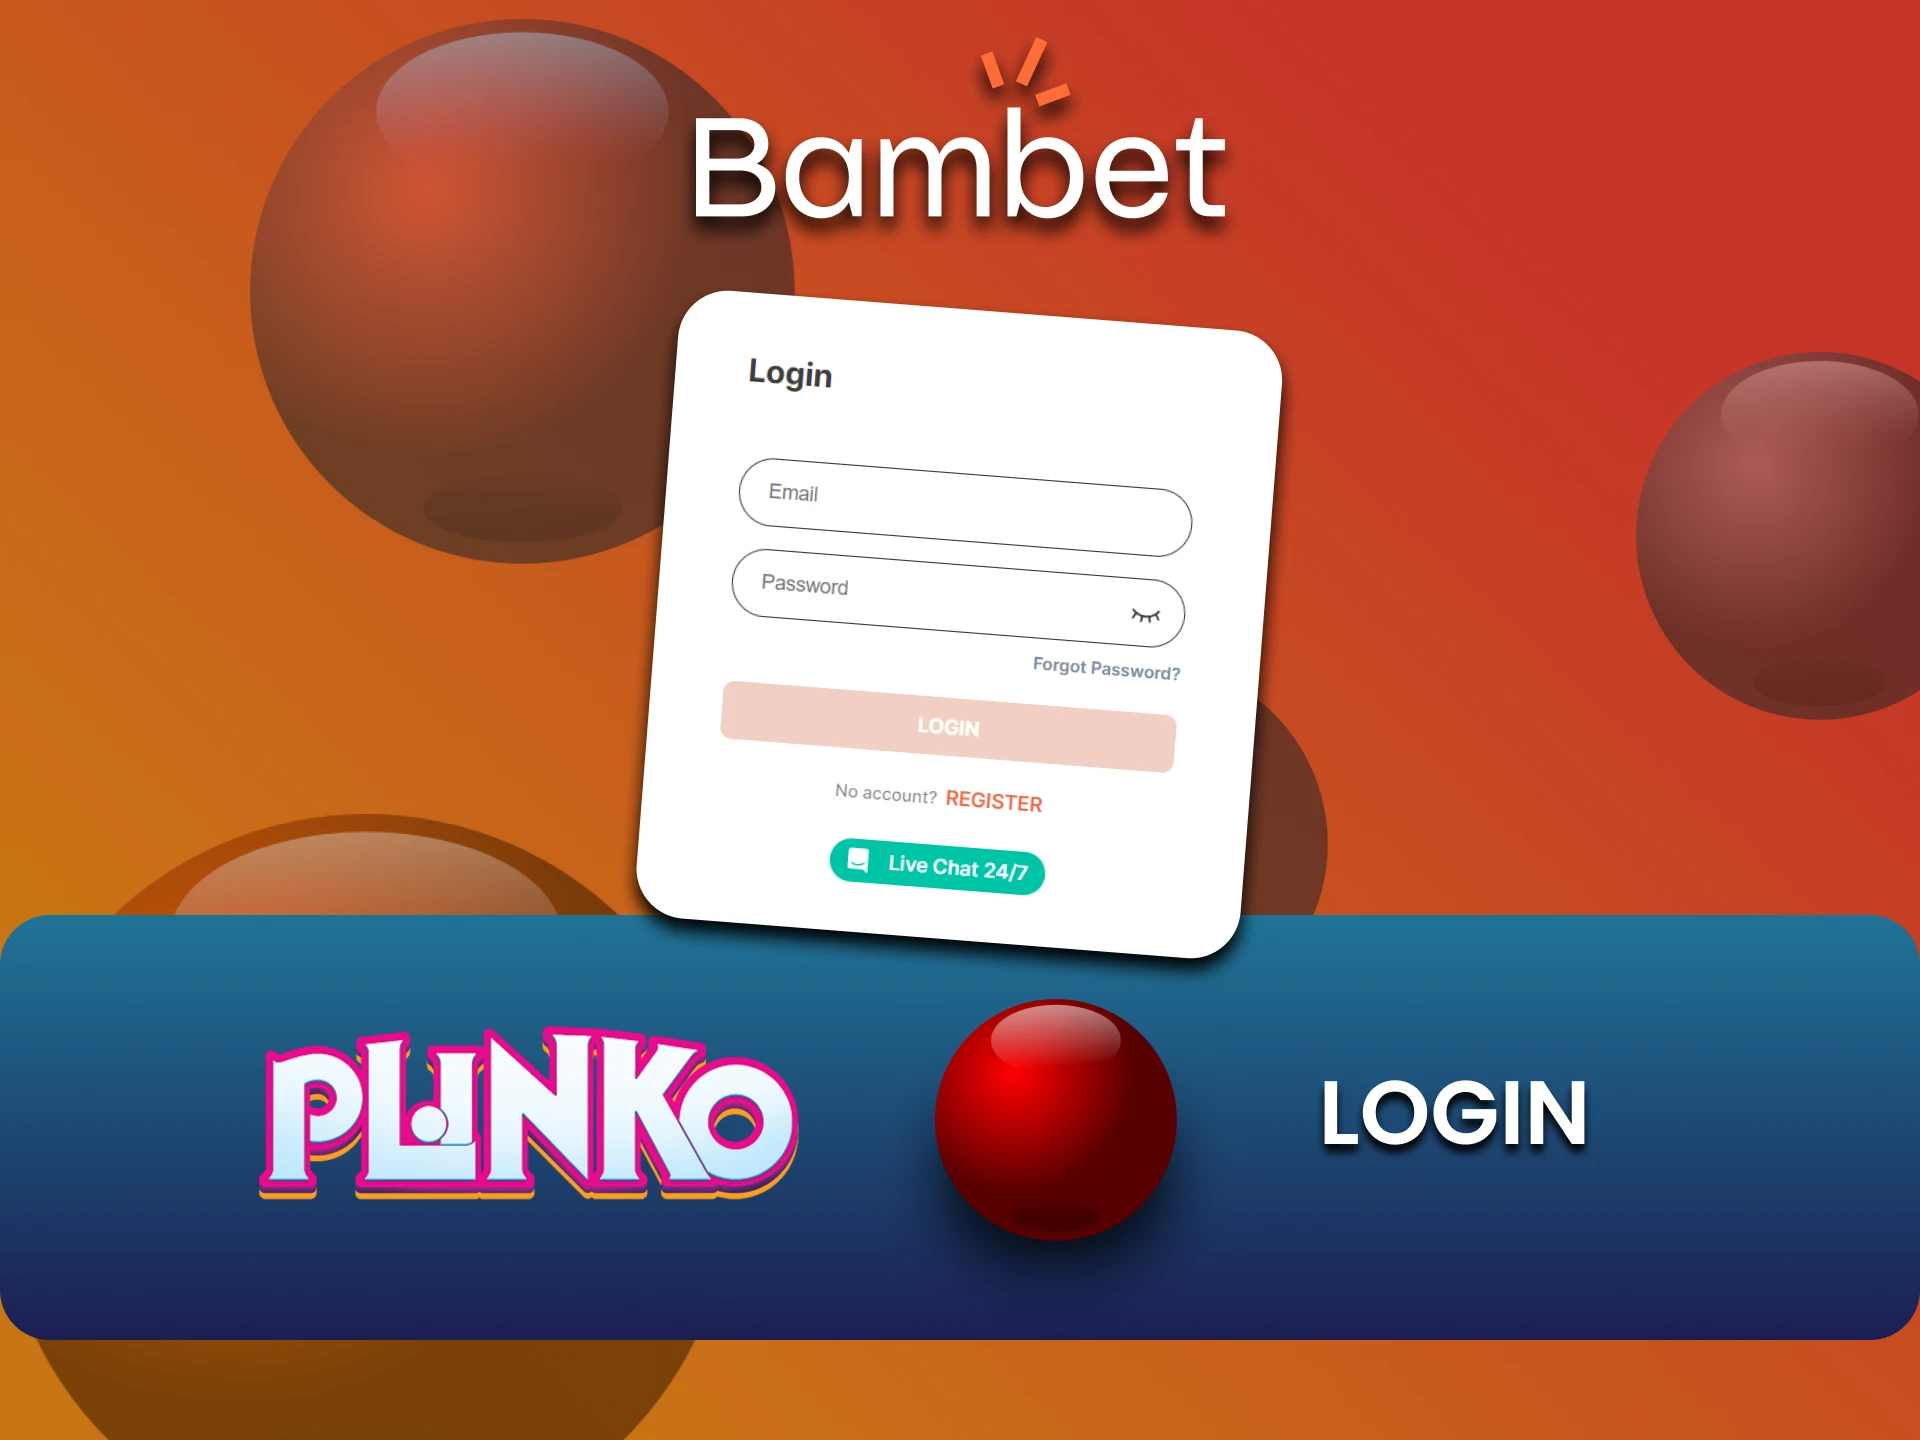 Log into your Bambet account and start playing Plinko.